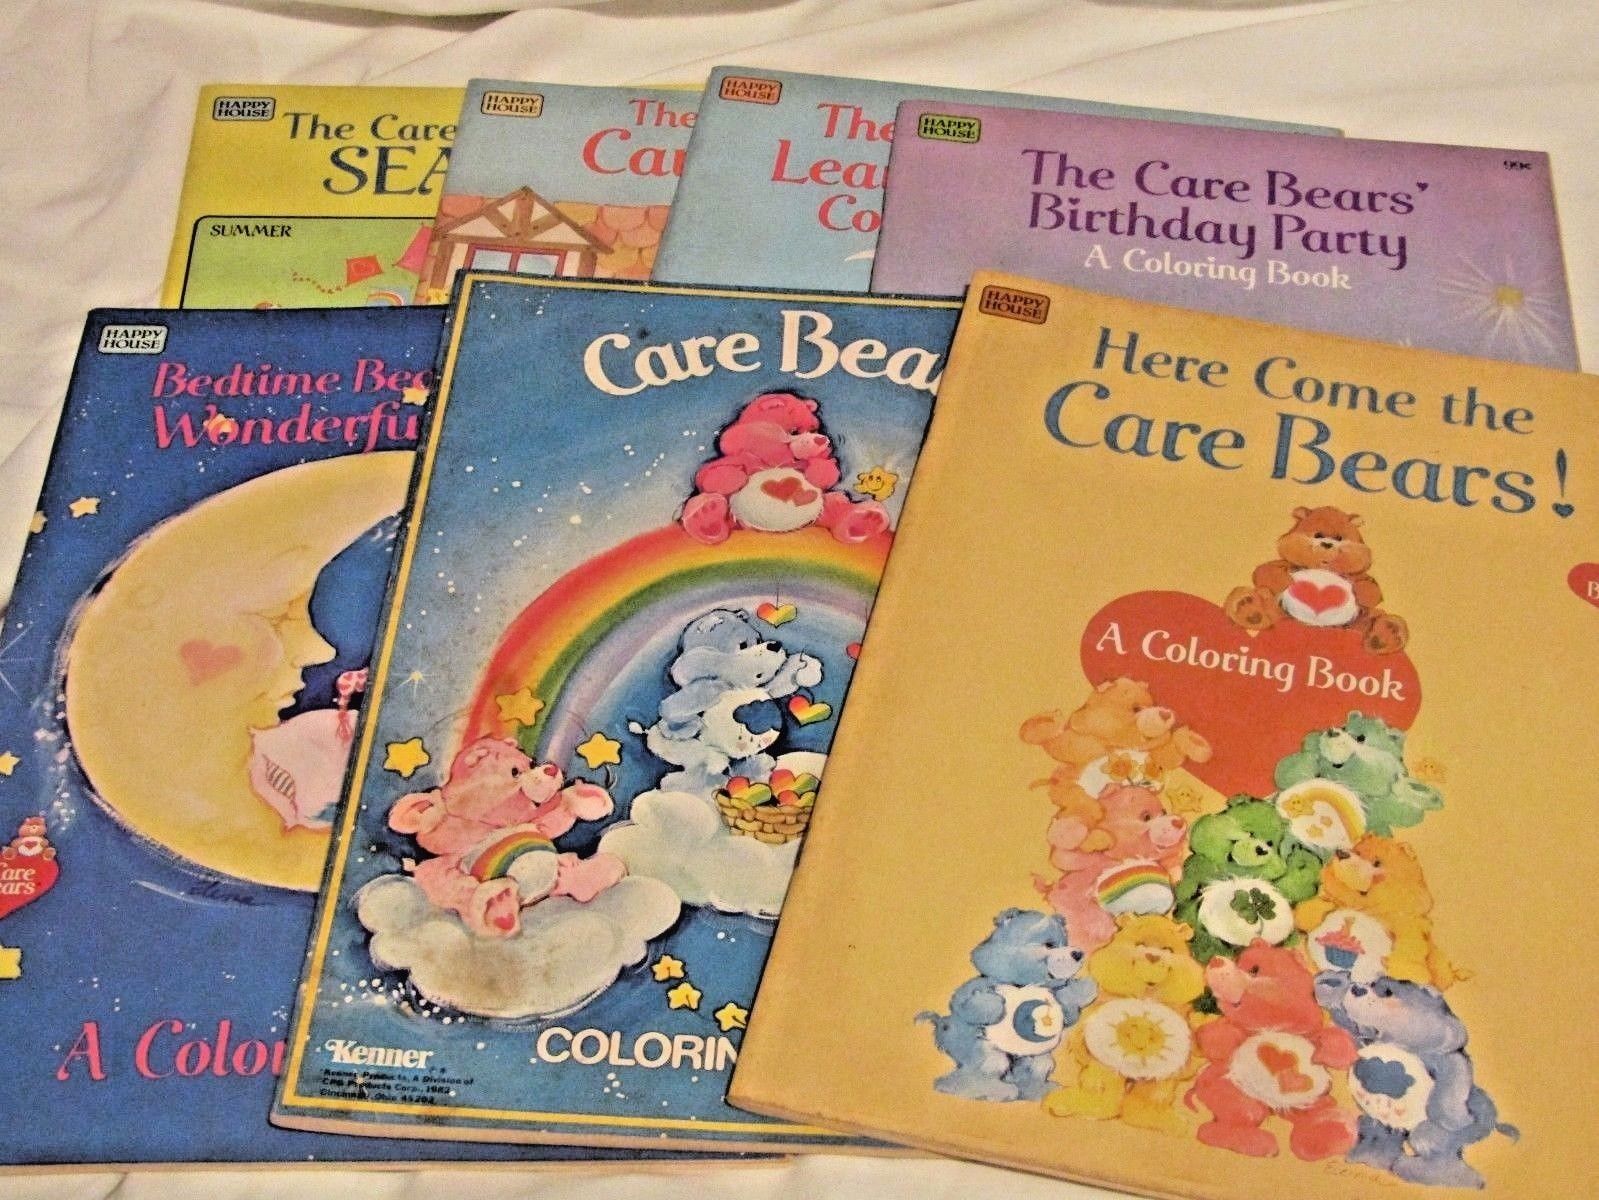 The Care Bears Coloring Book Vtg 1984 & Highlights Magazine Dec 1975 for sale online 